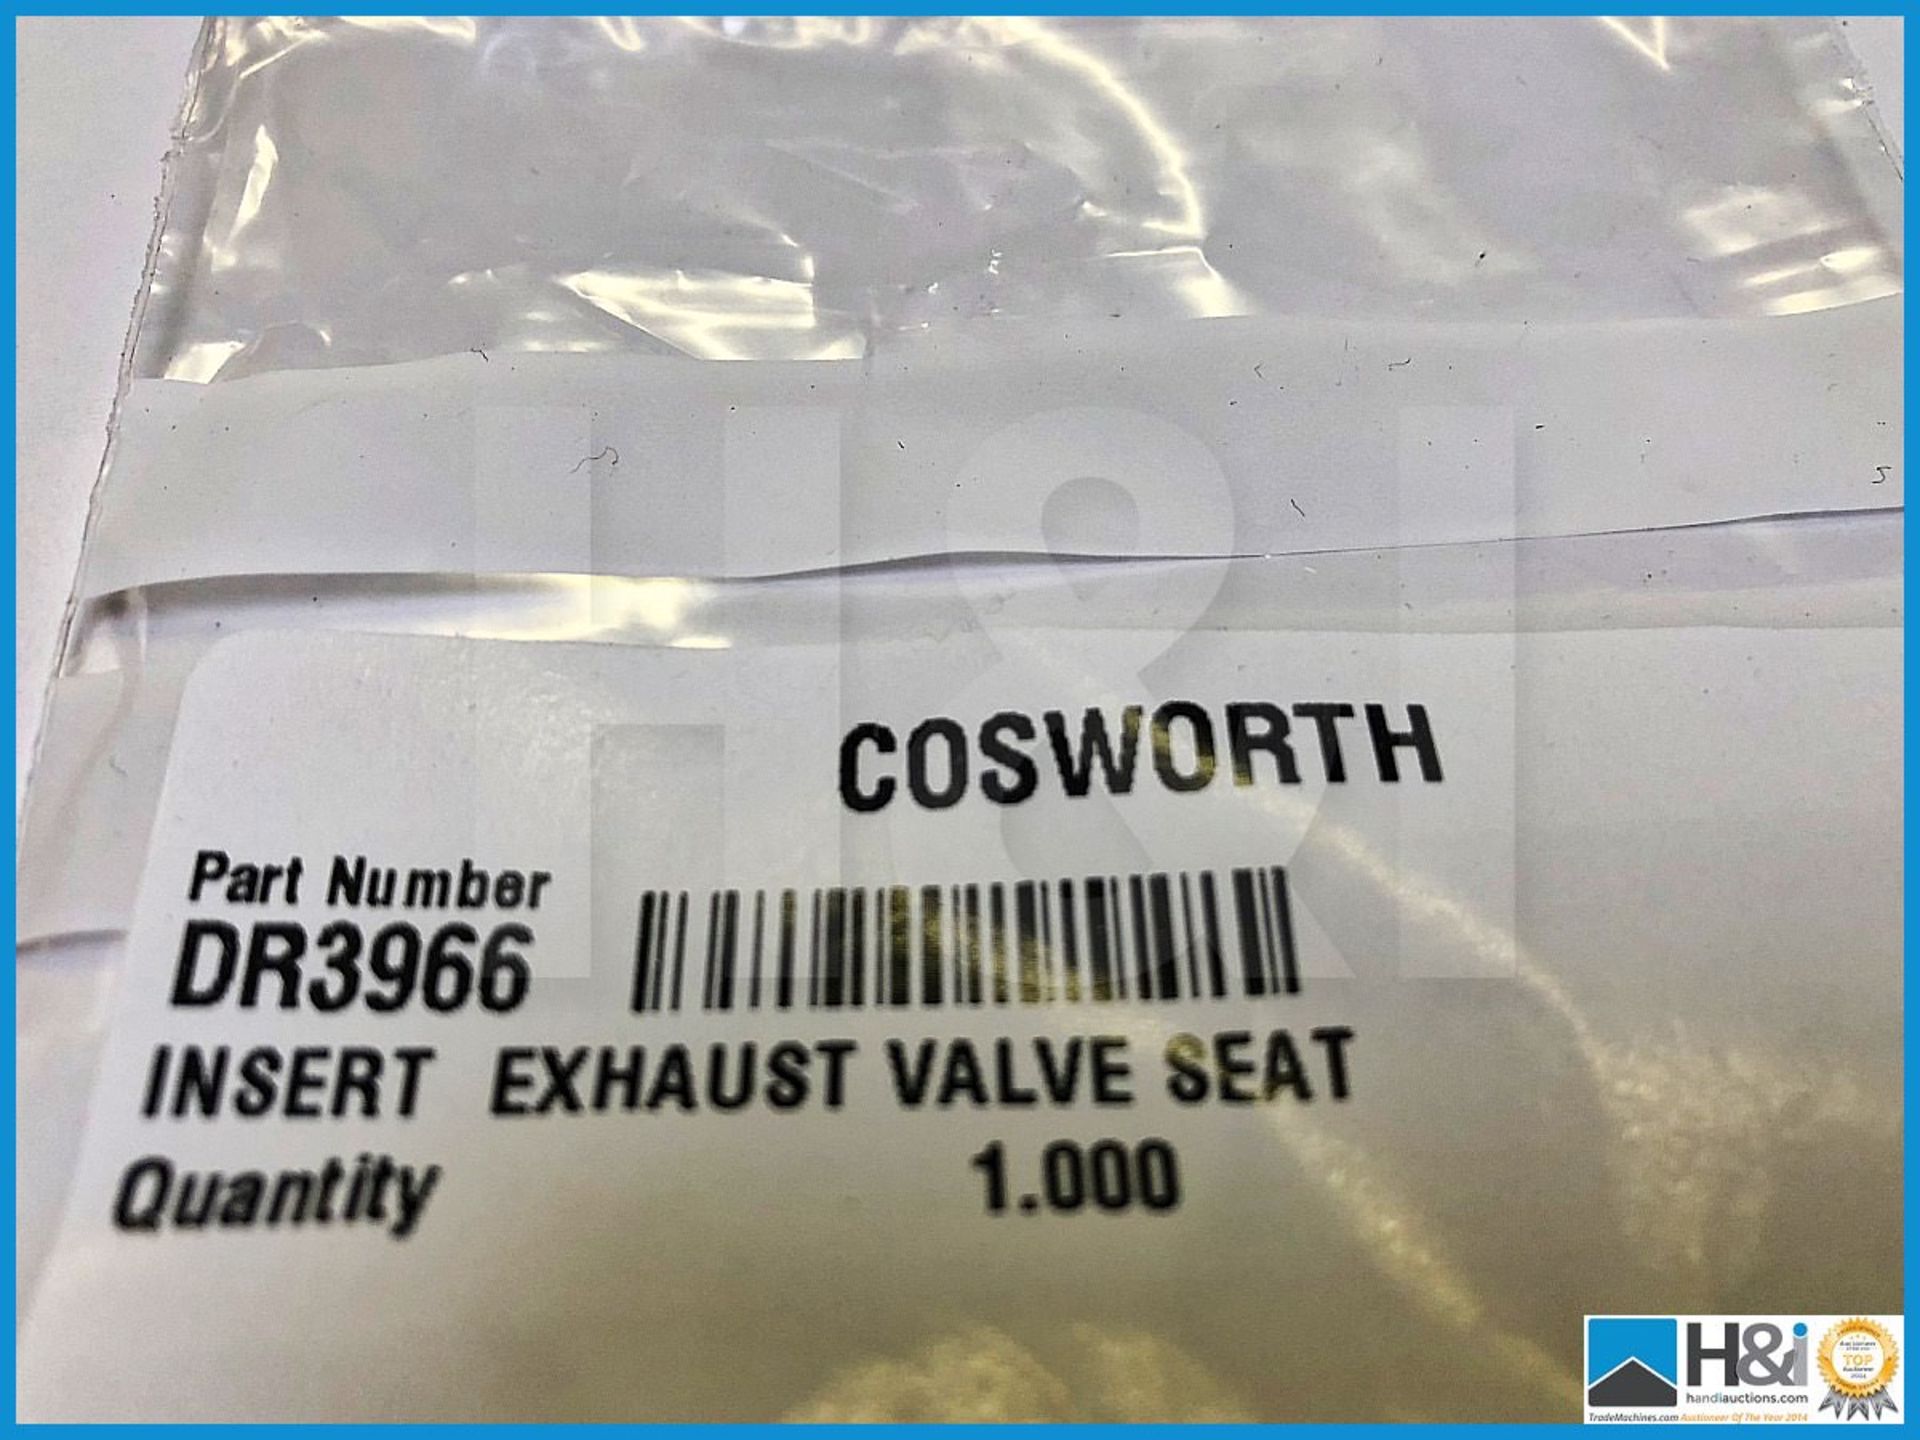 875 x Cosworth Insert Exhaust Valve Seat. Code DR3966. Lot 31. RRP GBP 7,595 - Image 3 of 3